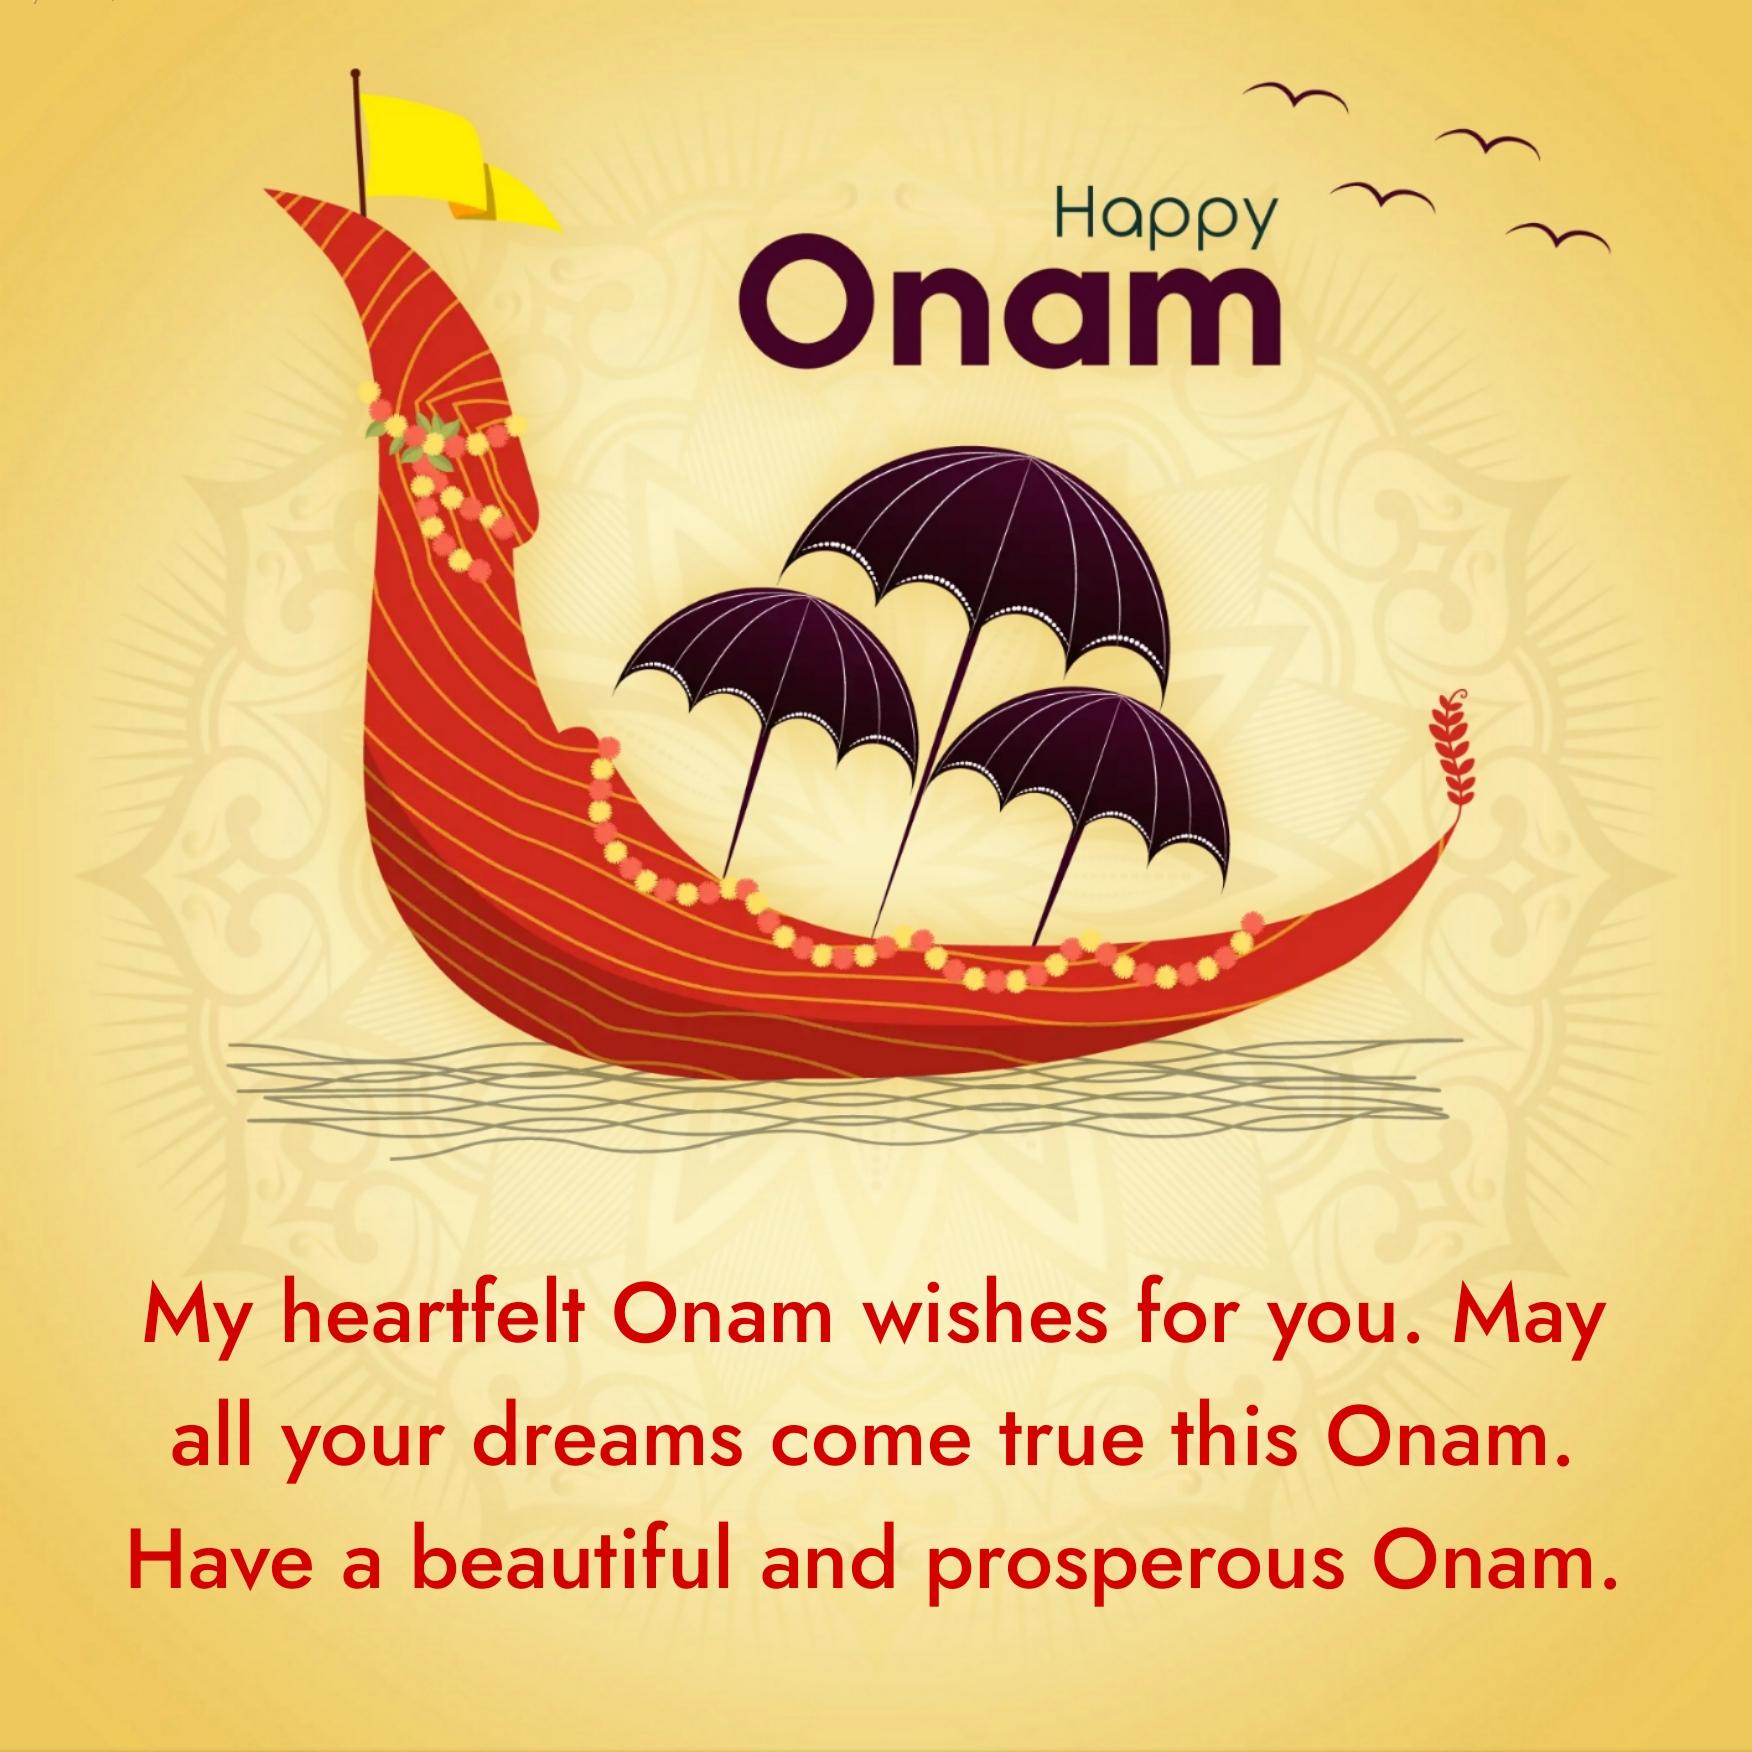 My heartfelt Onam wishes for you May all your dreams come true